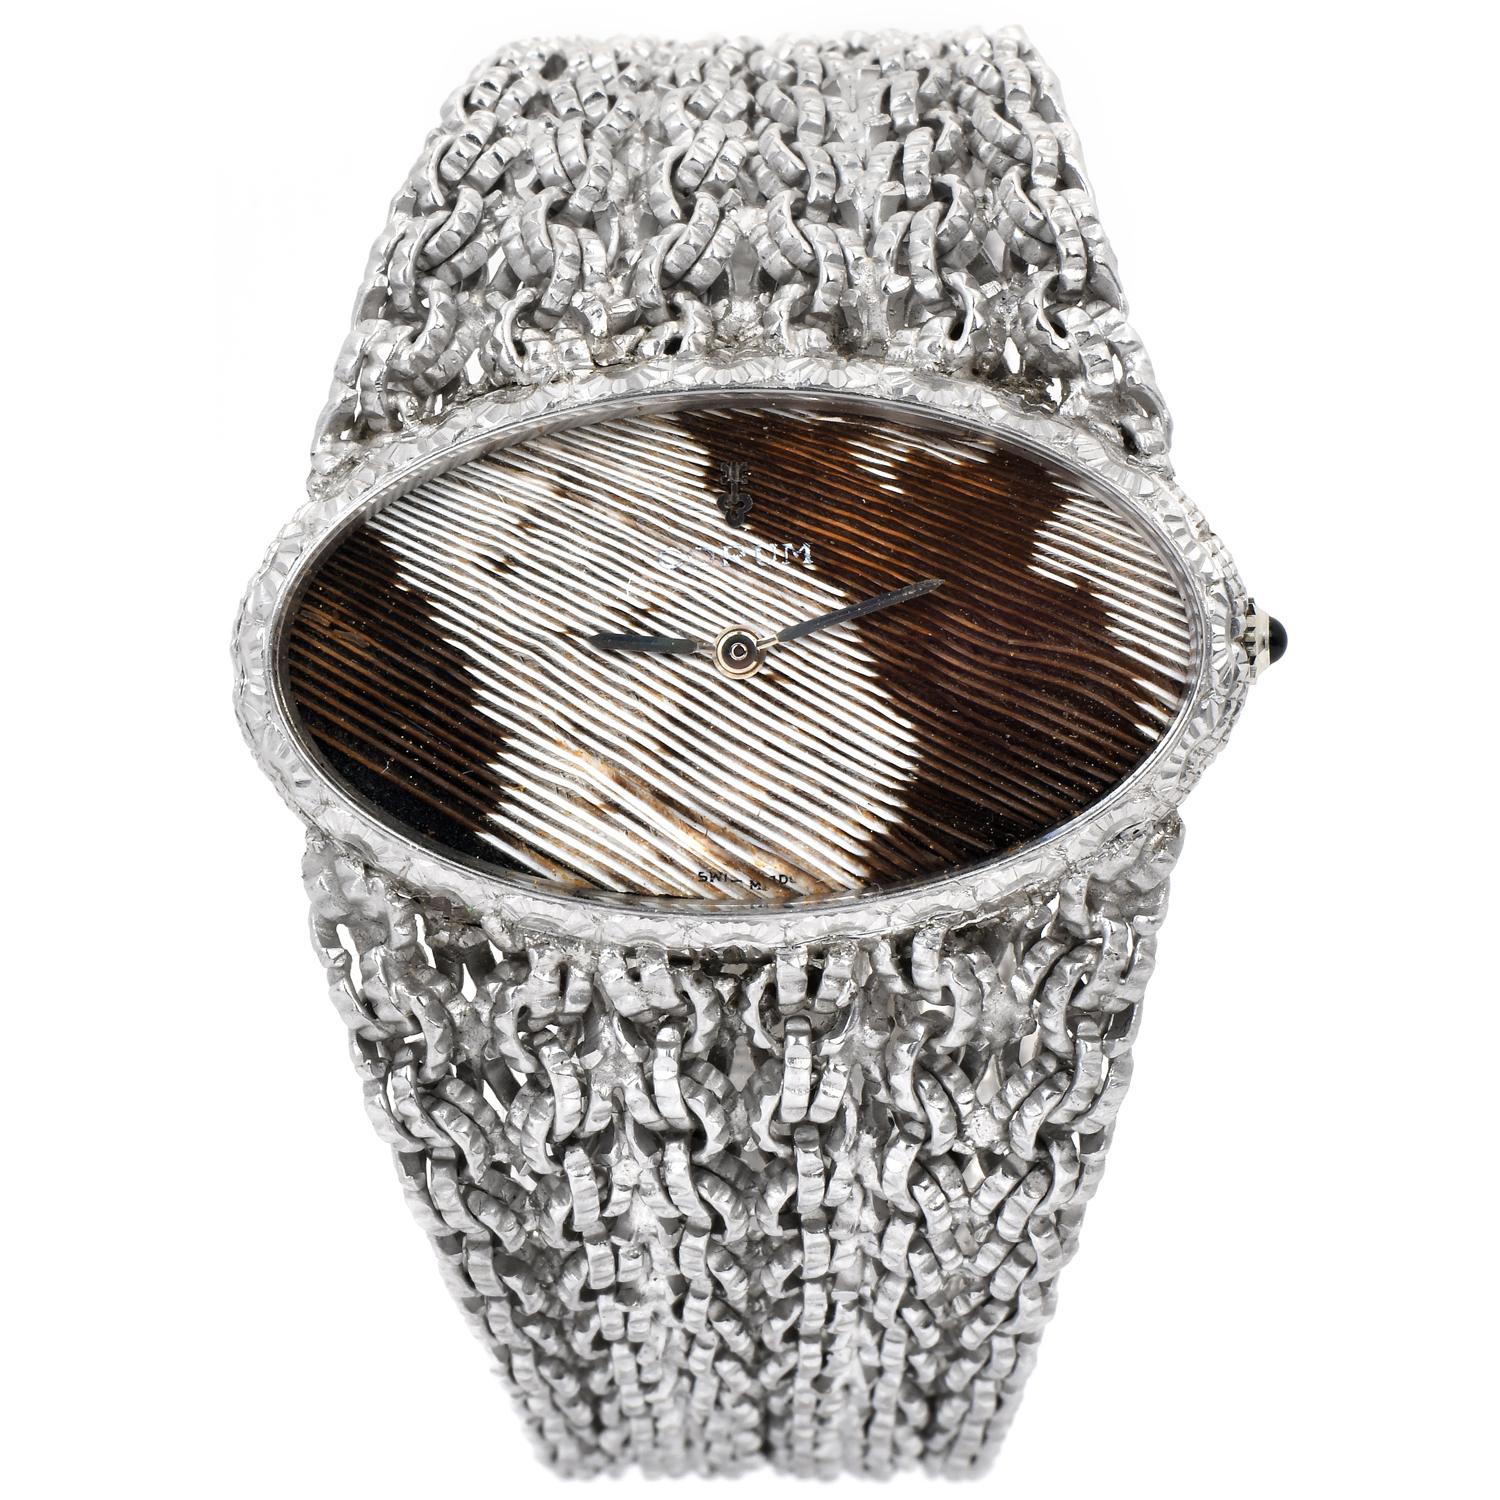 Experience the uniqueness of this Vintage Corum Textured Watch.  

Crafted in solid 18K White Gold, from circa the 1970s, this prominent-looking watch brings an intricate and luxurious look.

 The dial is a genuine peacock feather texture with,